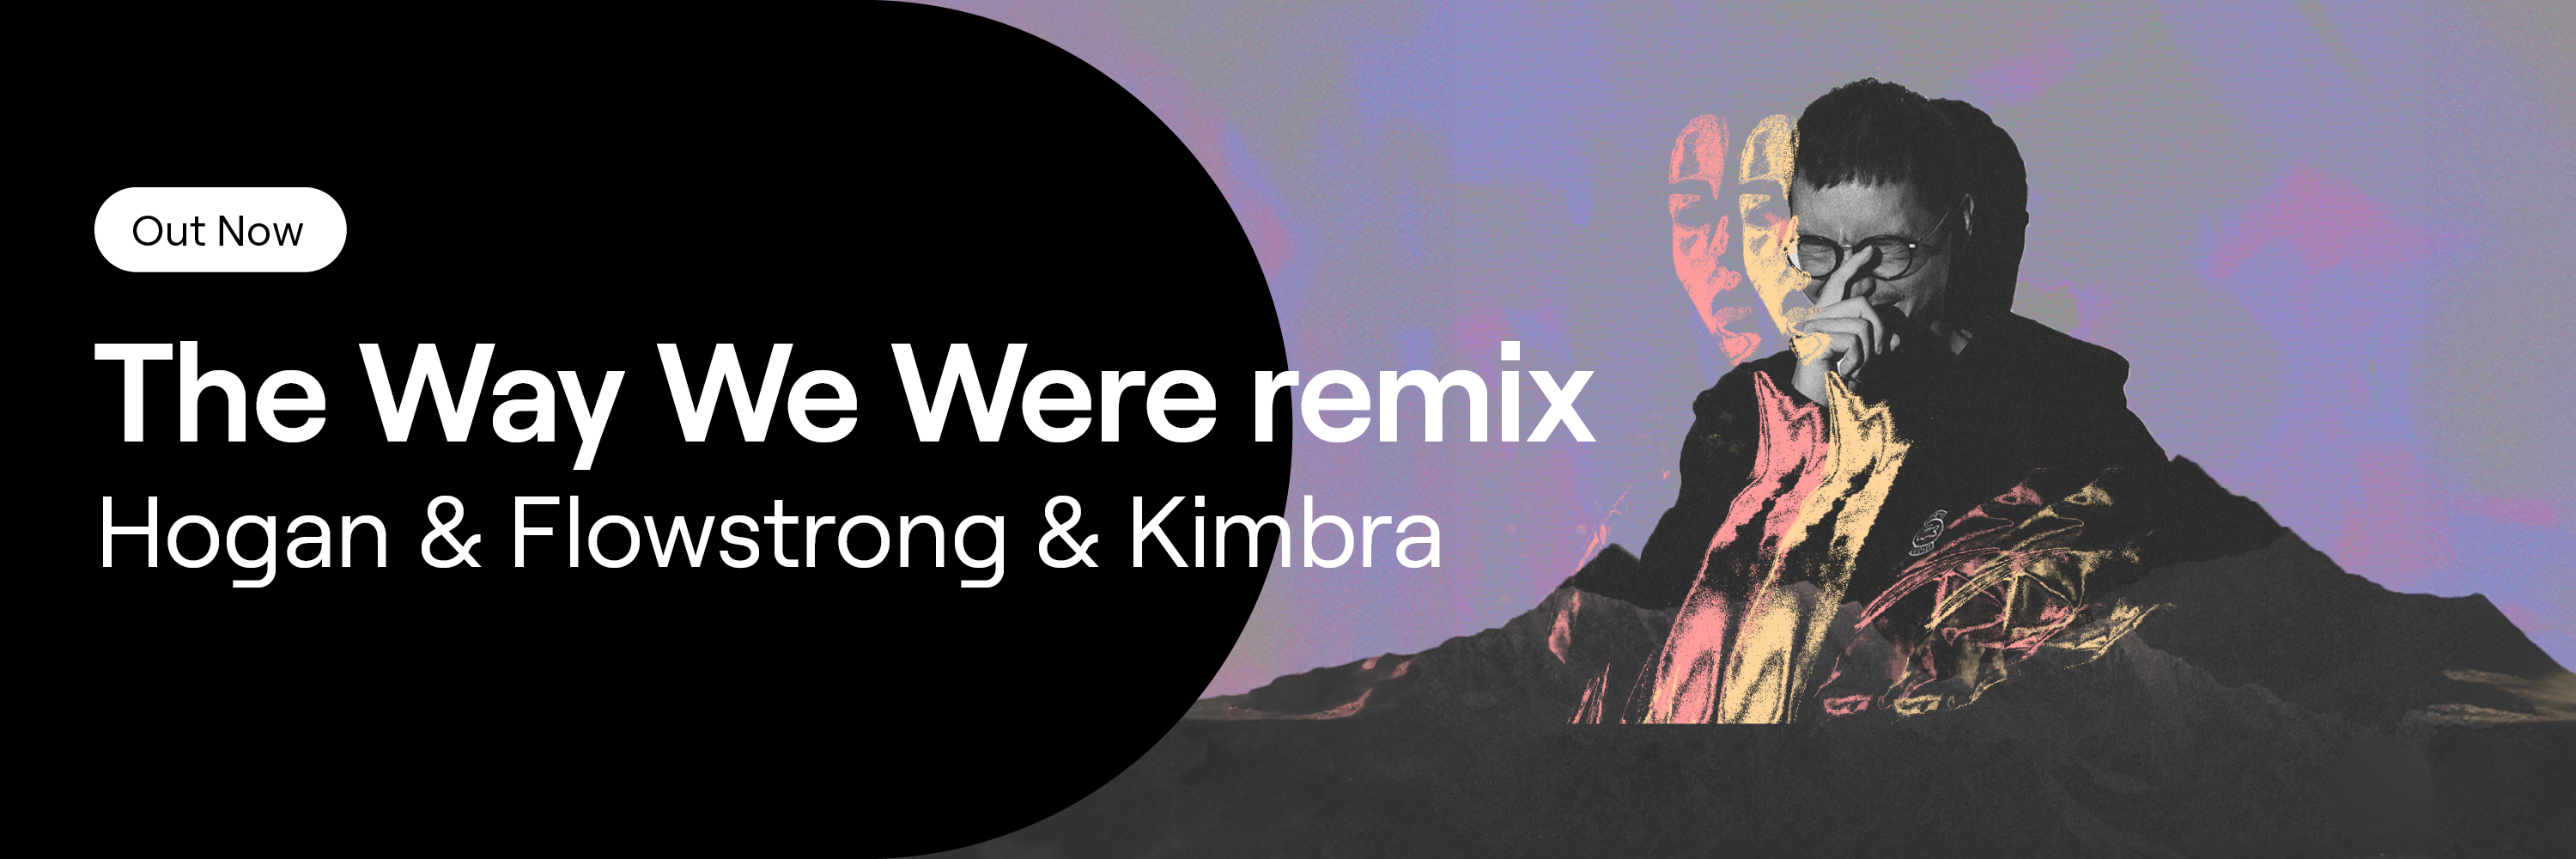 Out now: Kimbra remiix